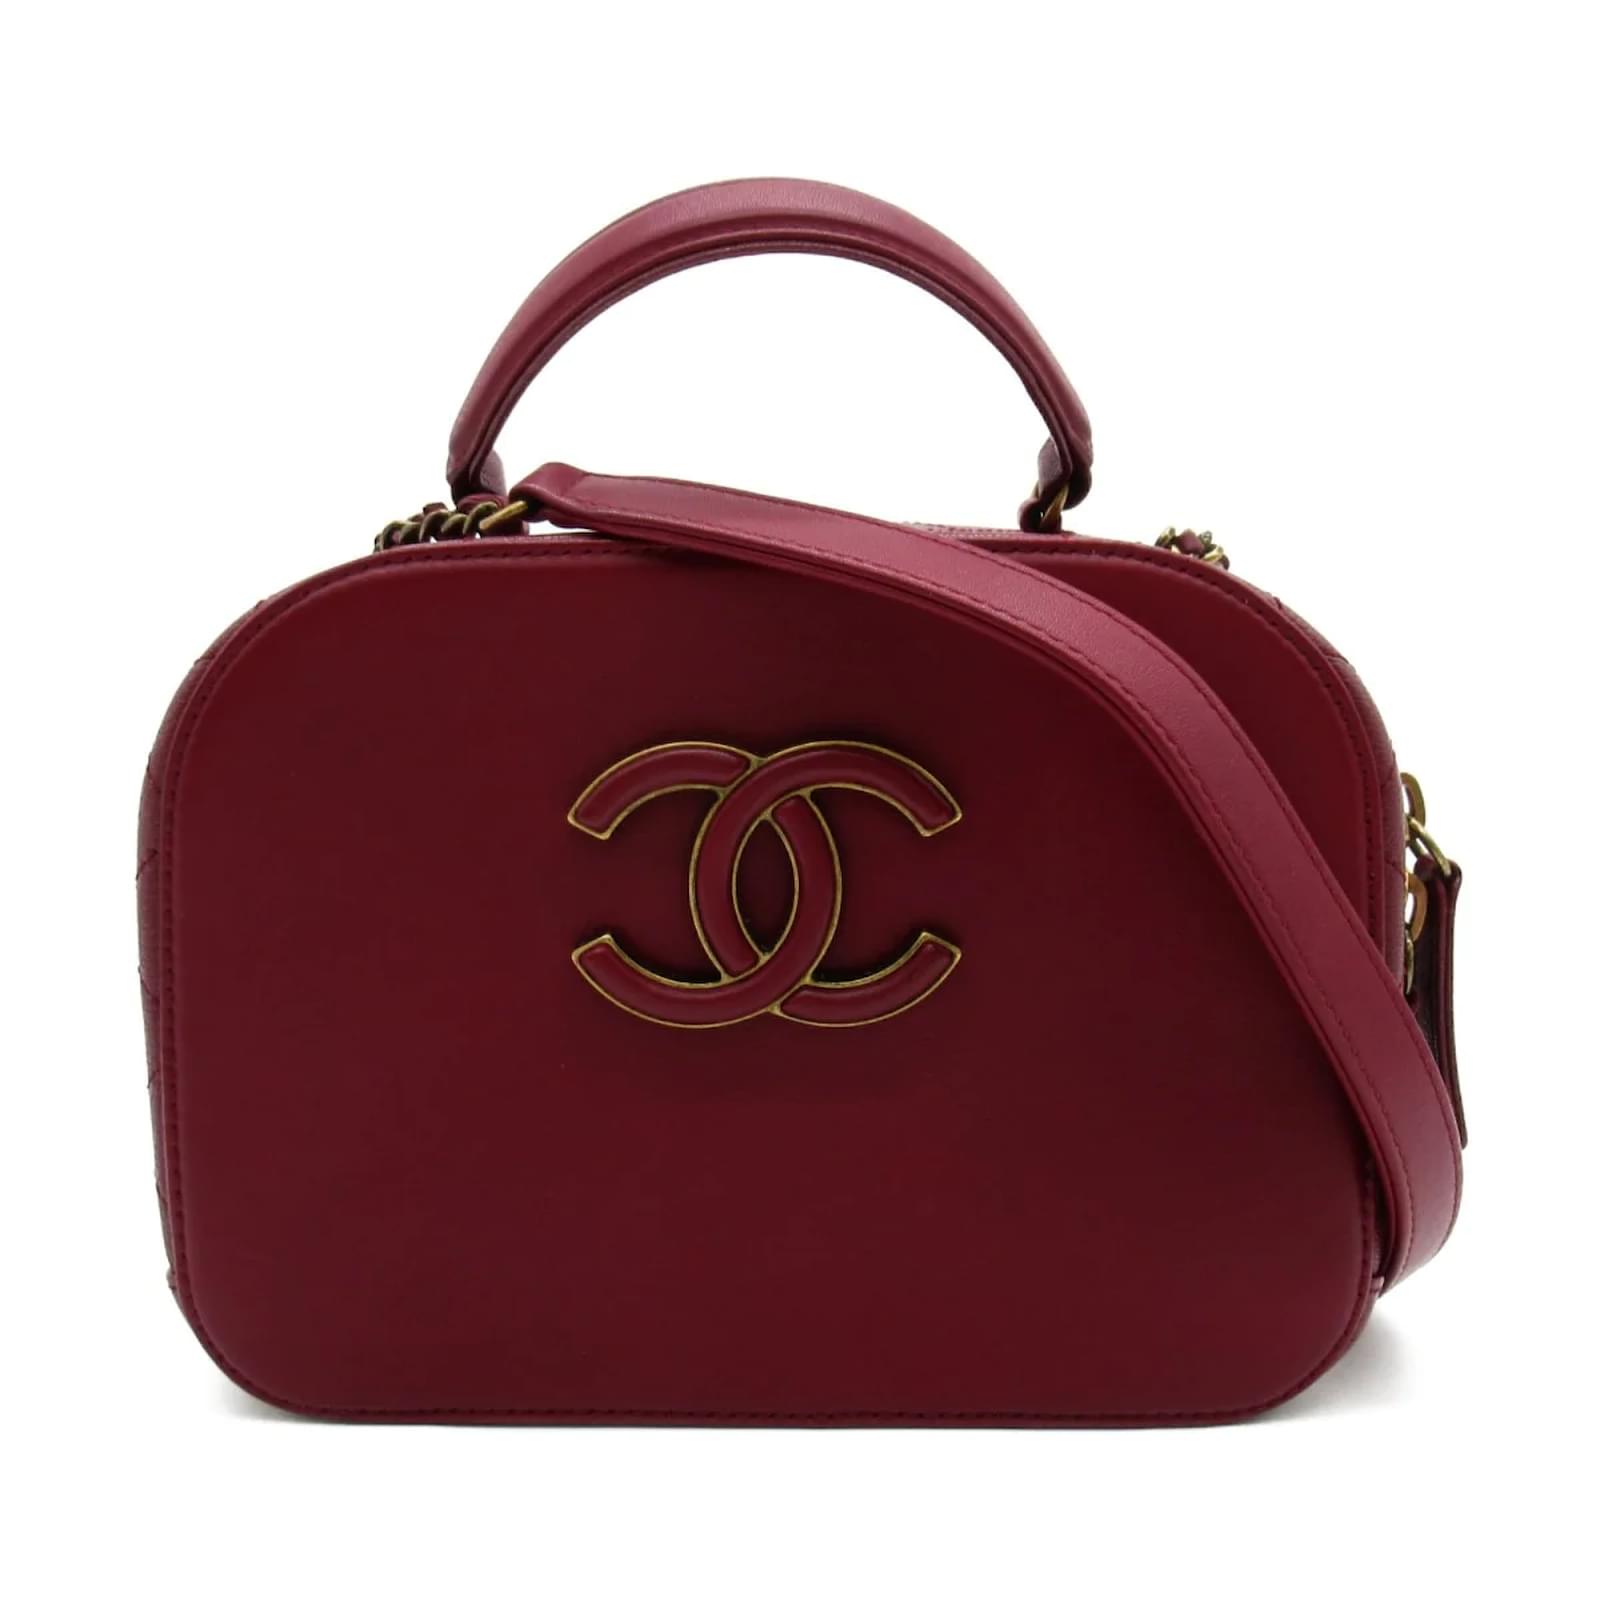 Chanel Coco Curve Vanity Case Bag Red Leather Pony-style calfskin